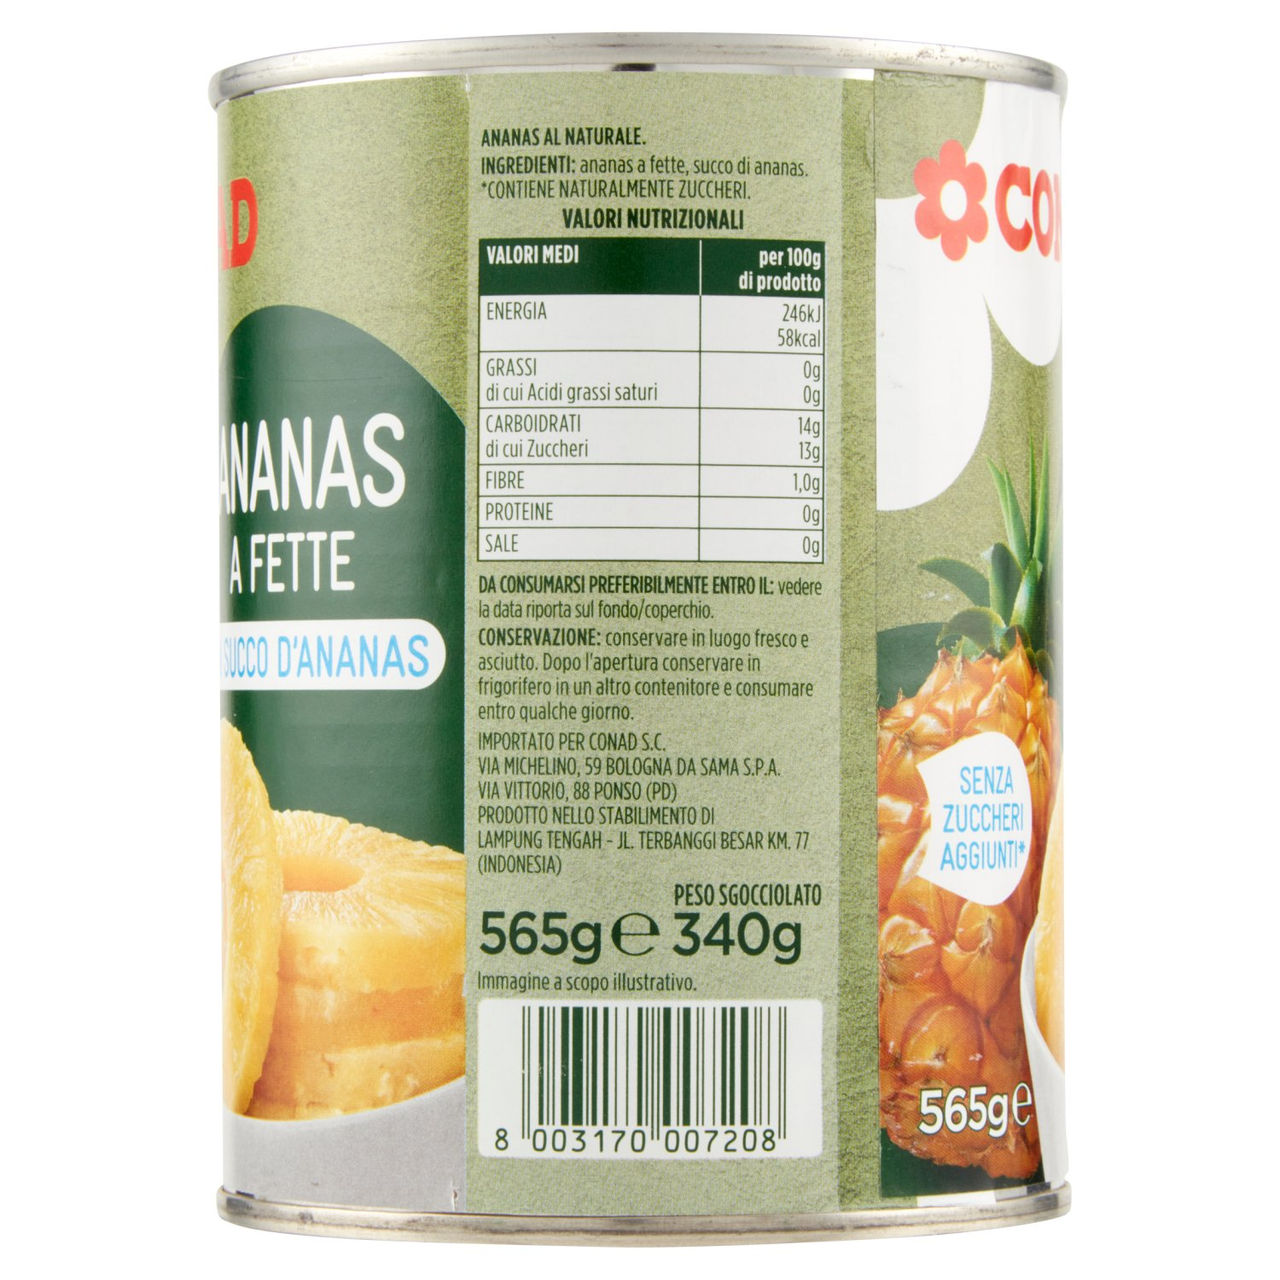 Ananas a Fette in Succo d'Ananas 565 g Conad